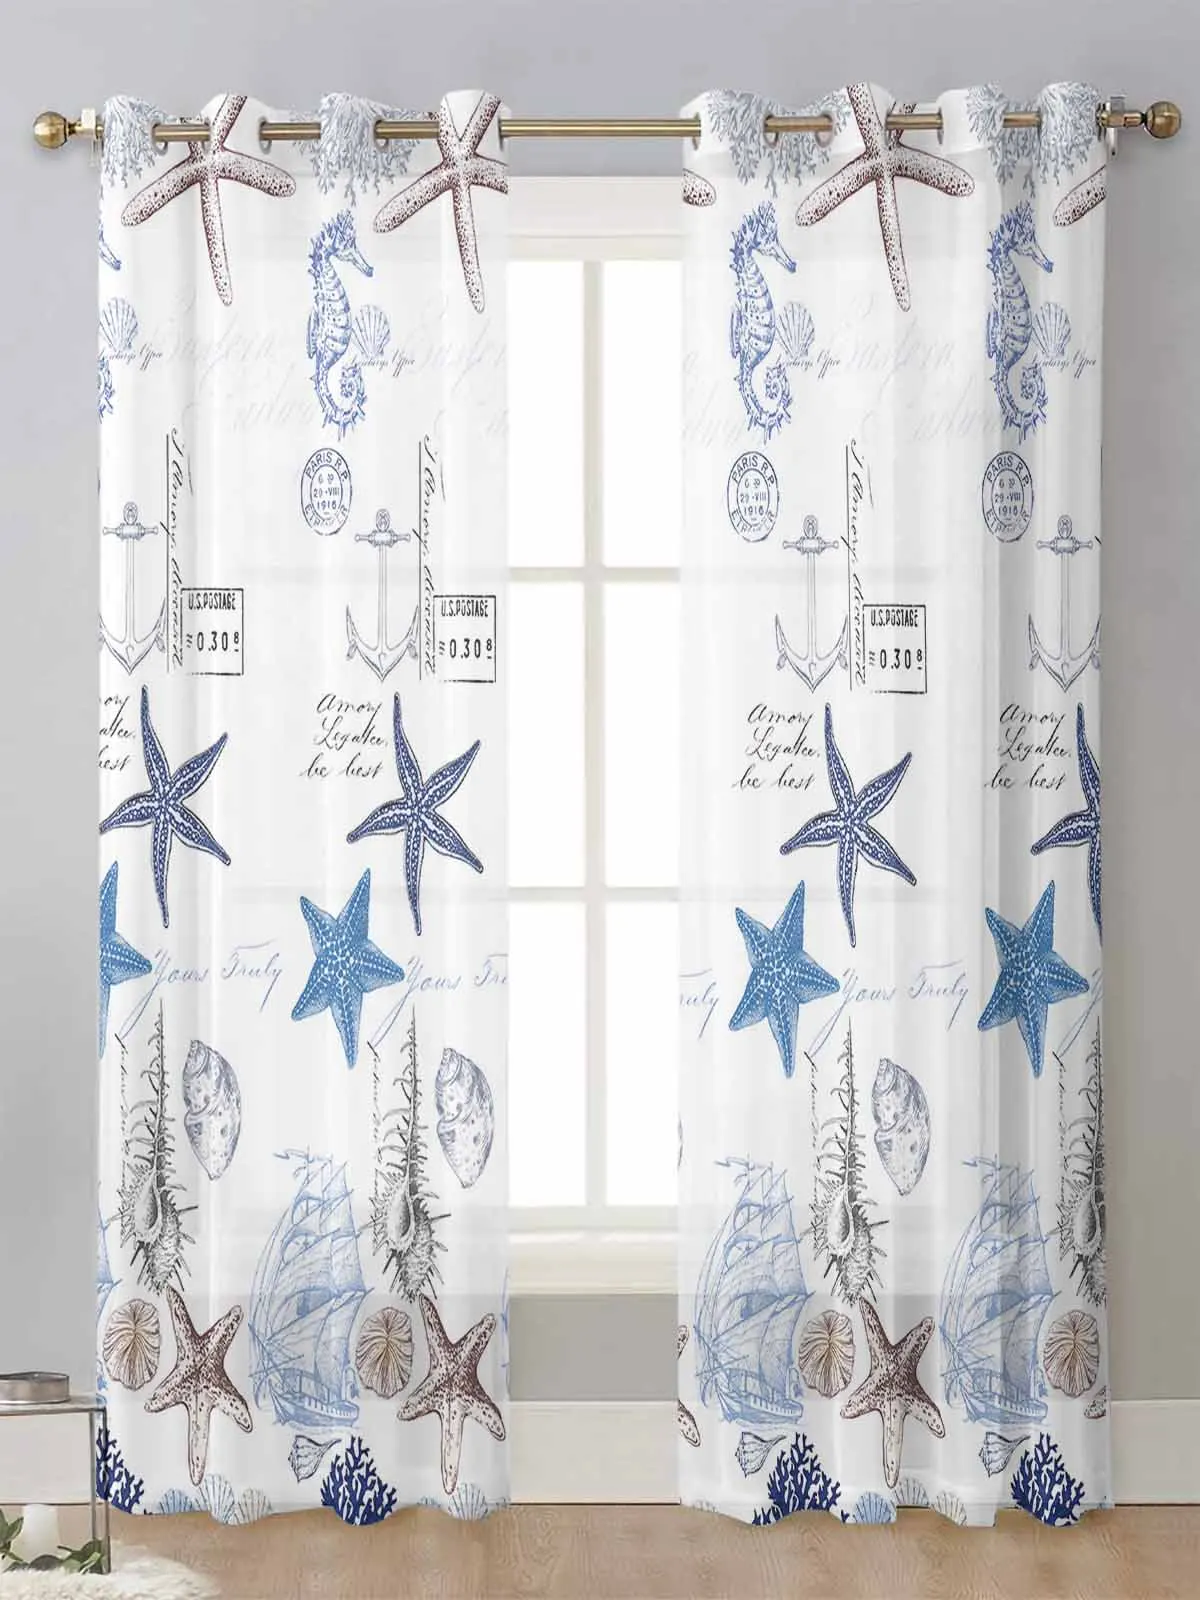 

Marine Texture Seashells Starfish Seahorse Sheer Curtains For Living Room Window Voile Tulle Curtain Cortinas Drapes Home Decor